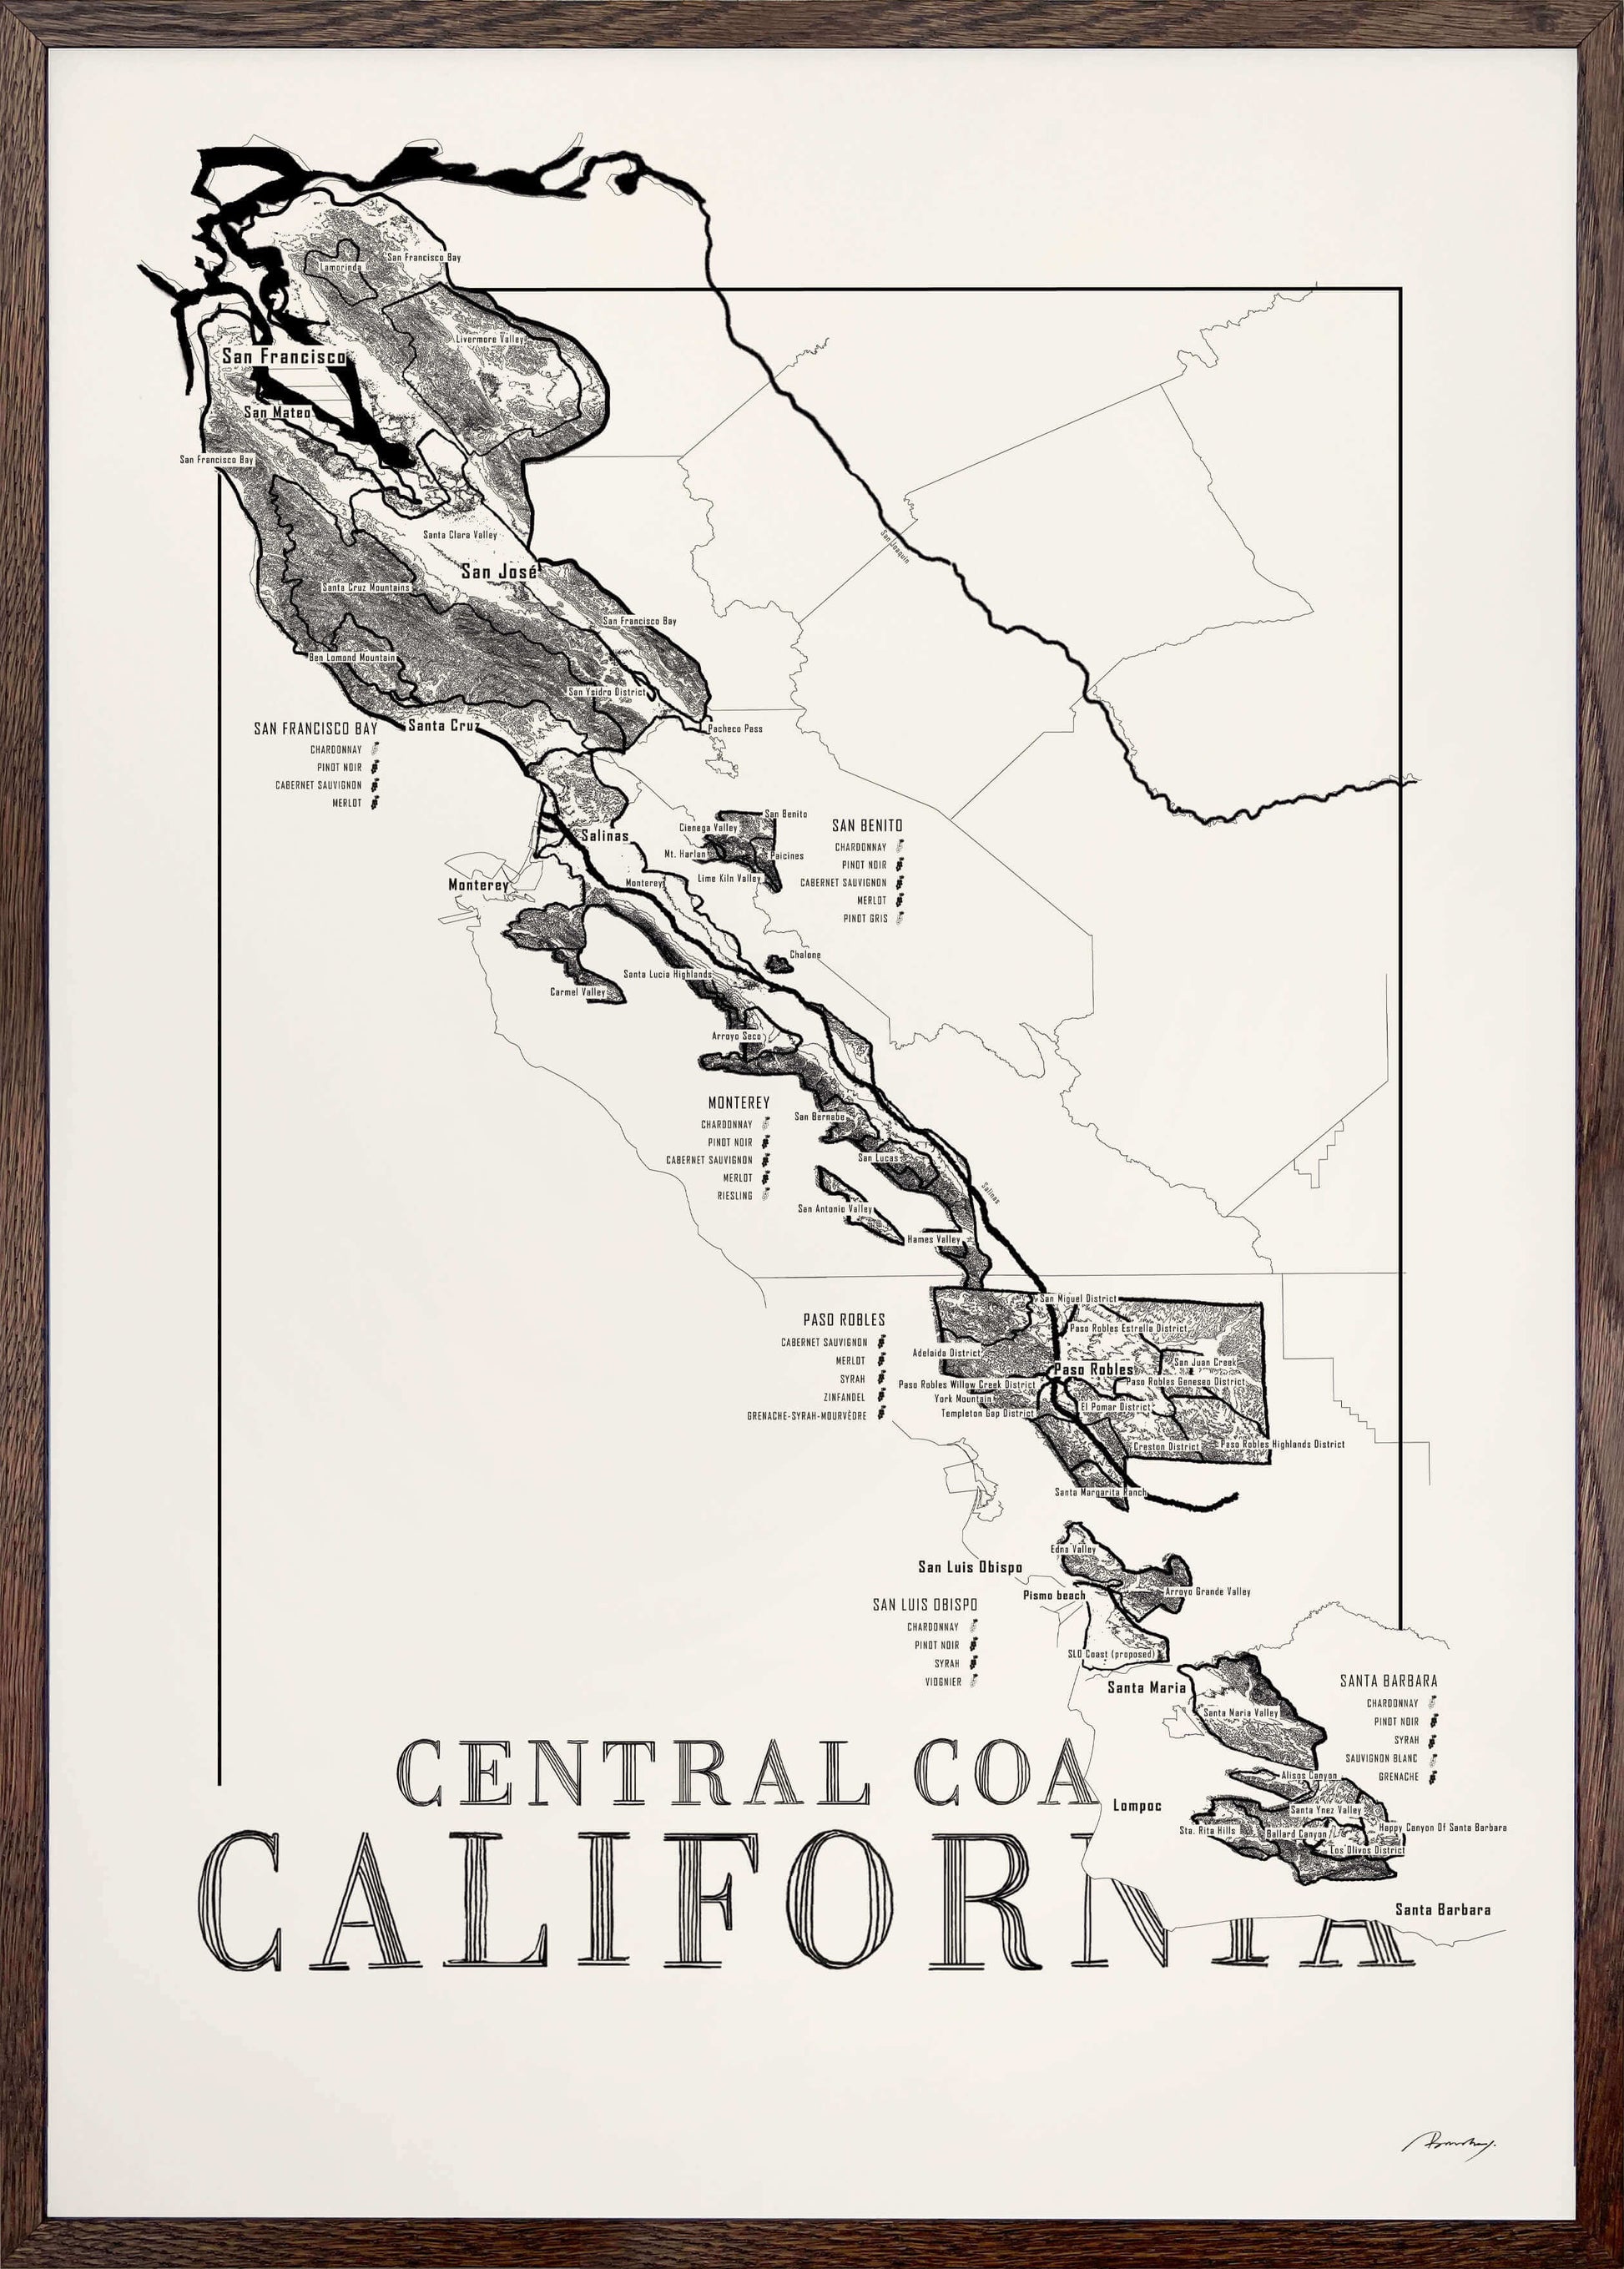 Central Coast Californa Wine map poster. Exclusive wine map posters. Premium quality wine maps printed on environmentally friendly FSC marked paper. 